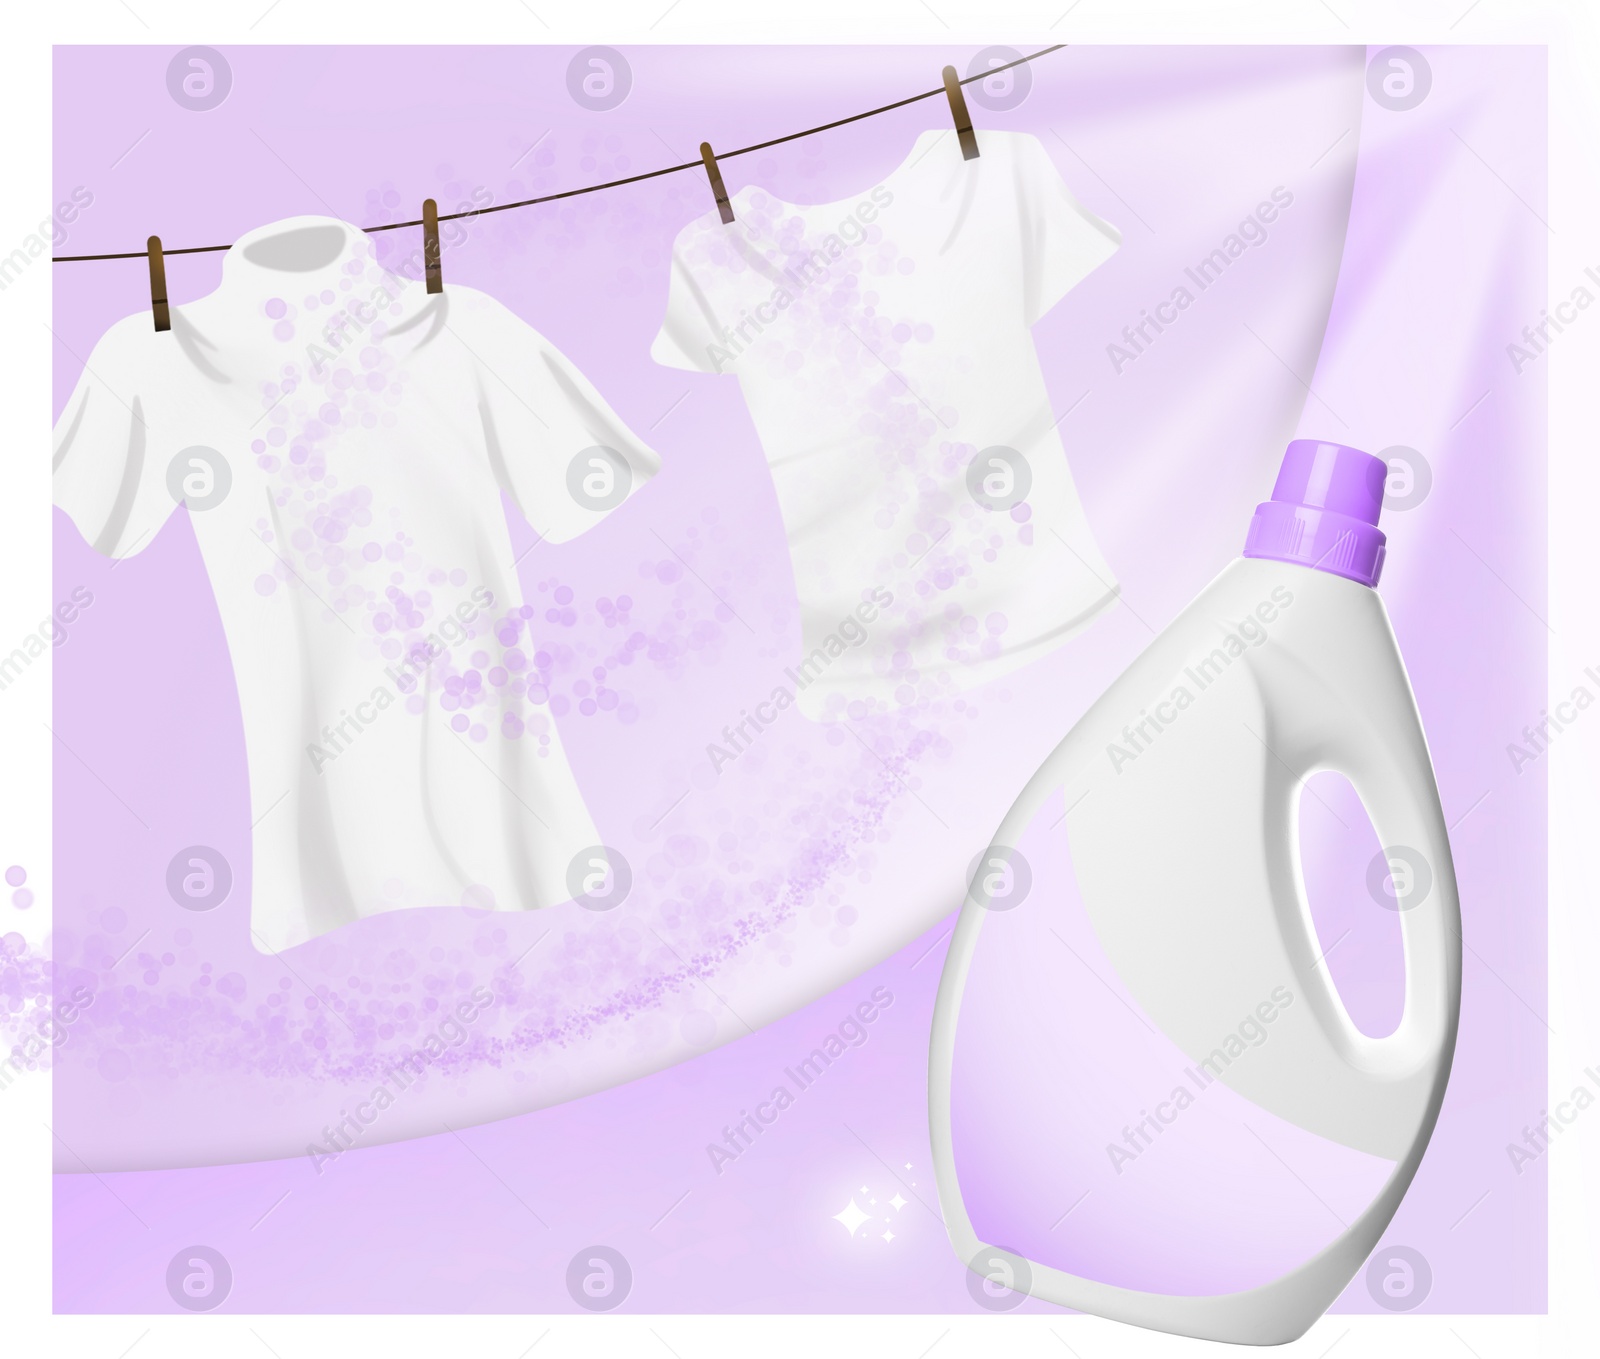 Image of Fabric softener advertising design. Bottle of conditioner and rope with drying laundry on violet background